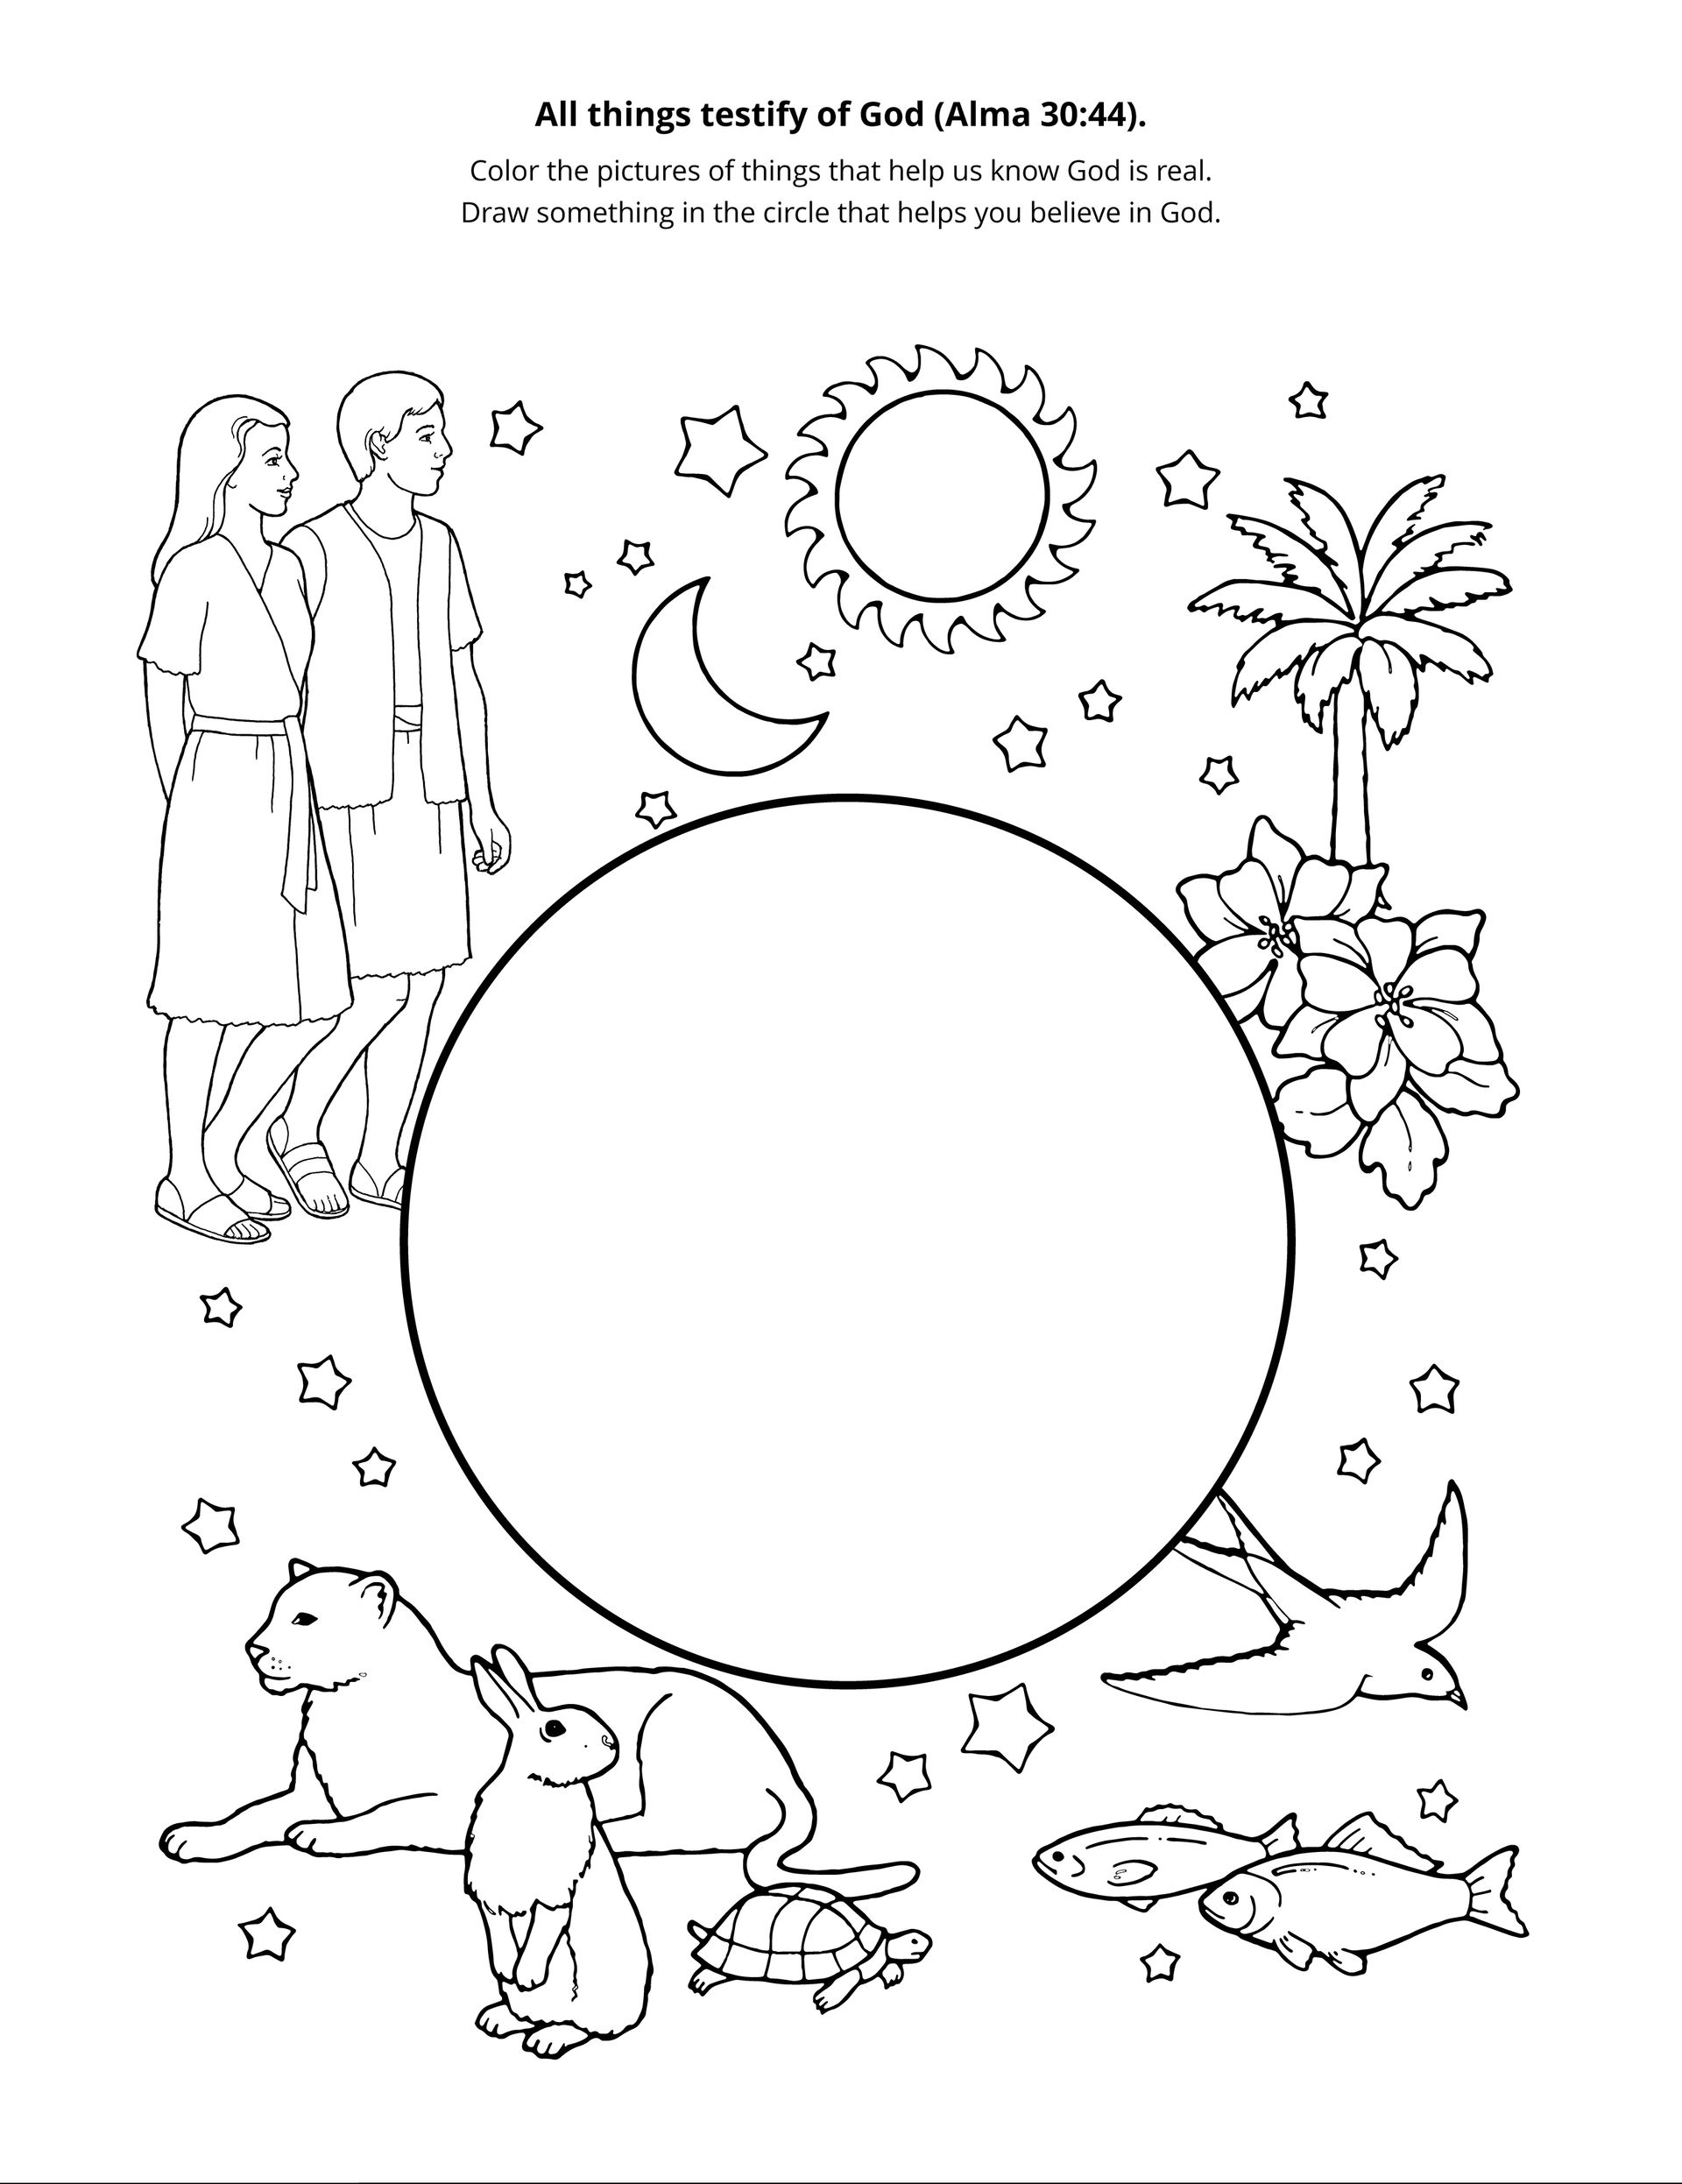 Line art depicting Adam and Eve and the Creation of the world. © undefined ipCode 1.